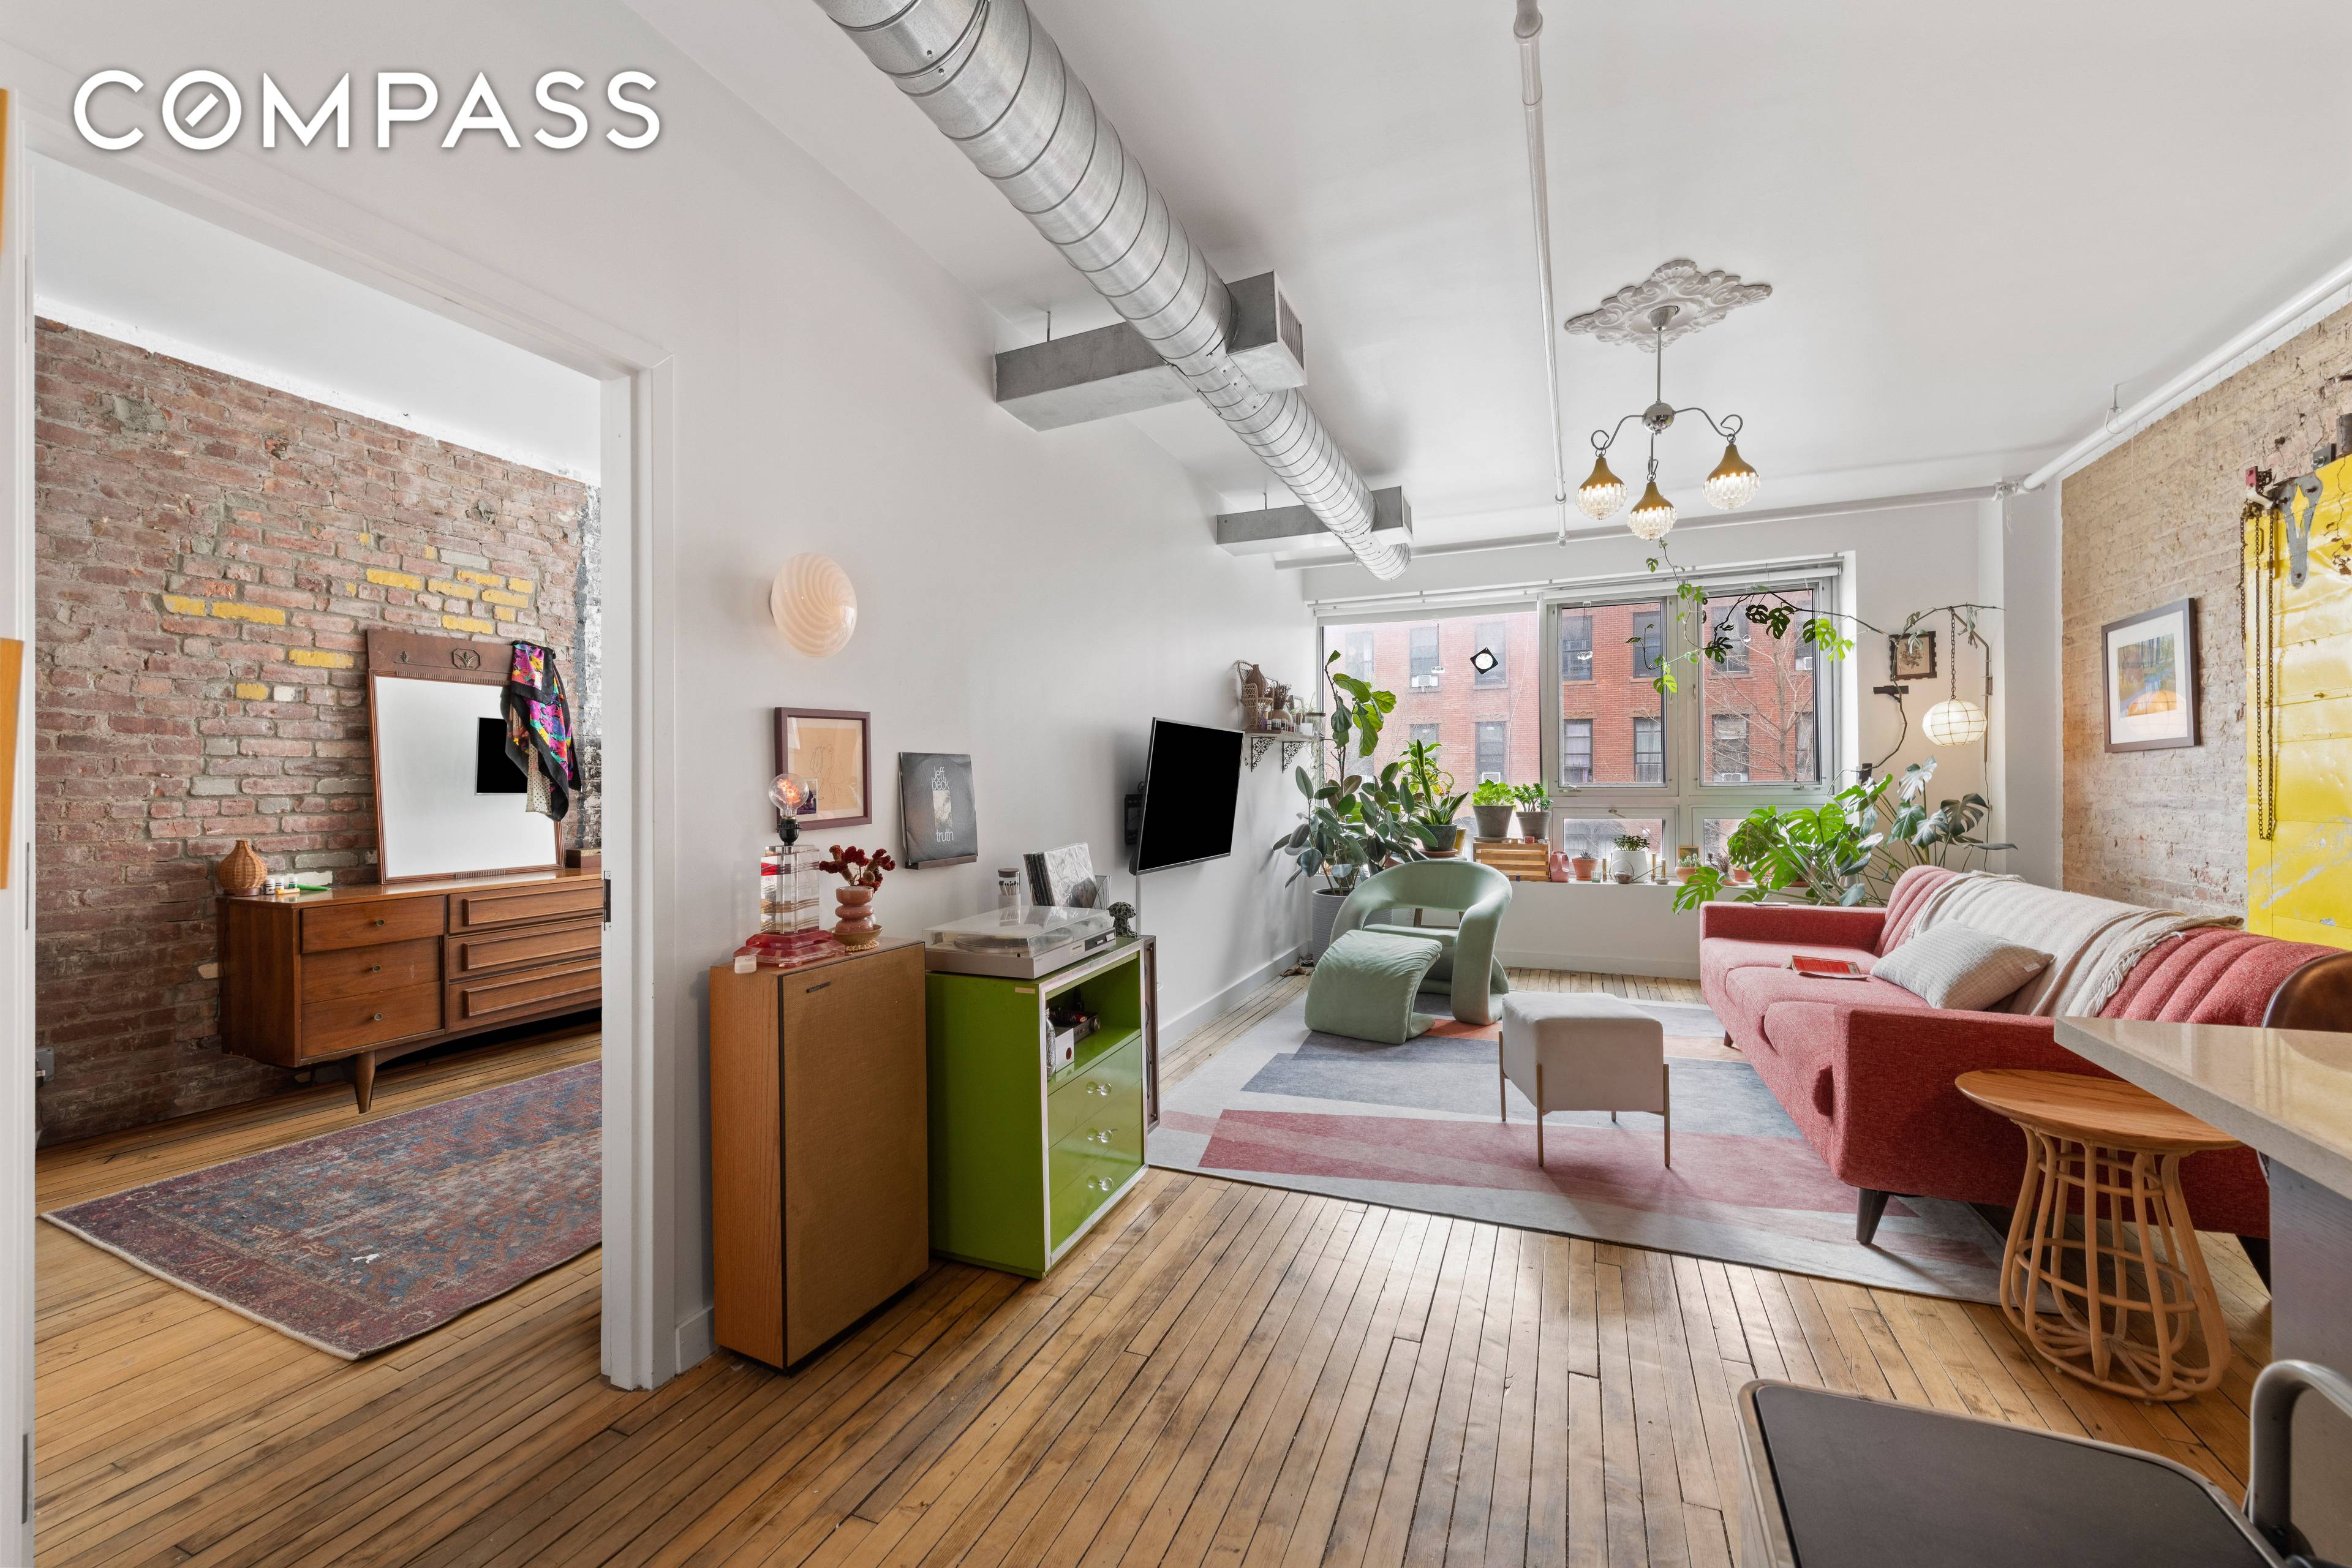 This 1, 011 square feet Brooklyn loft complete with a den office room and two full bathrooms is located at the intersection where Bedford Stuyvesant meets Clinton Hill.